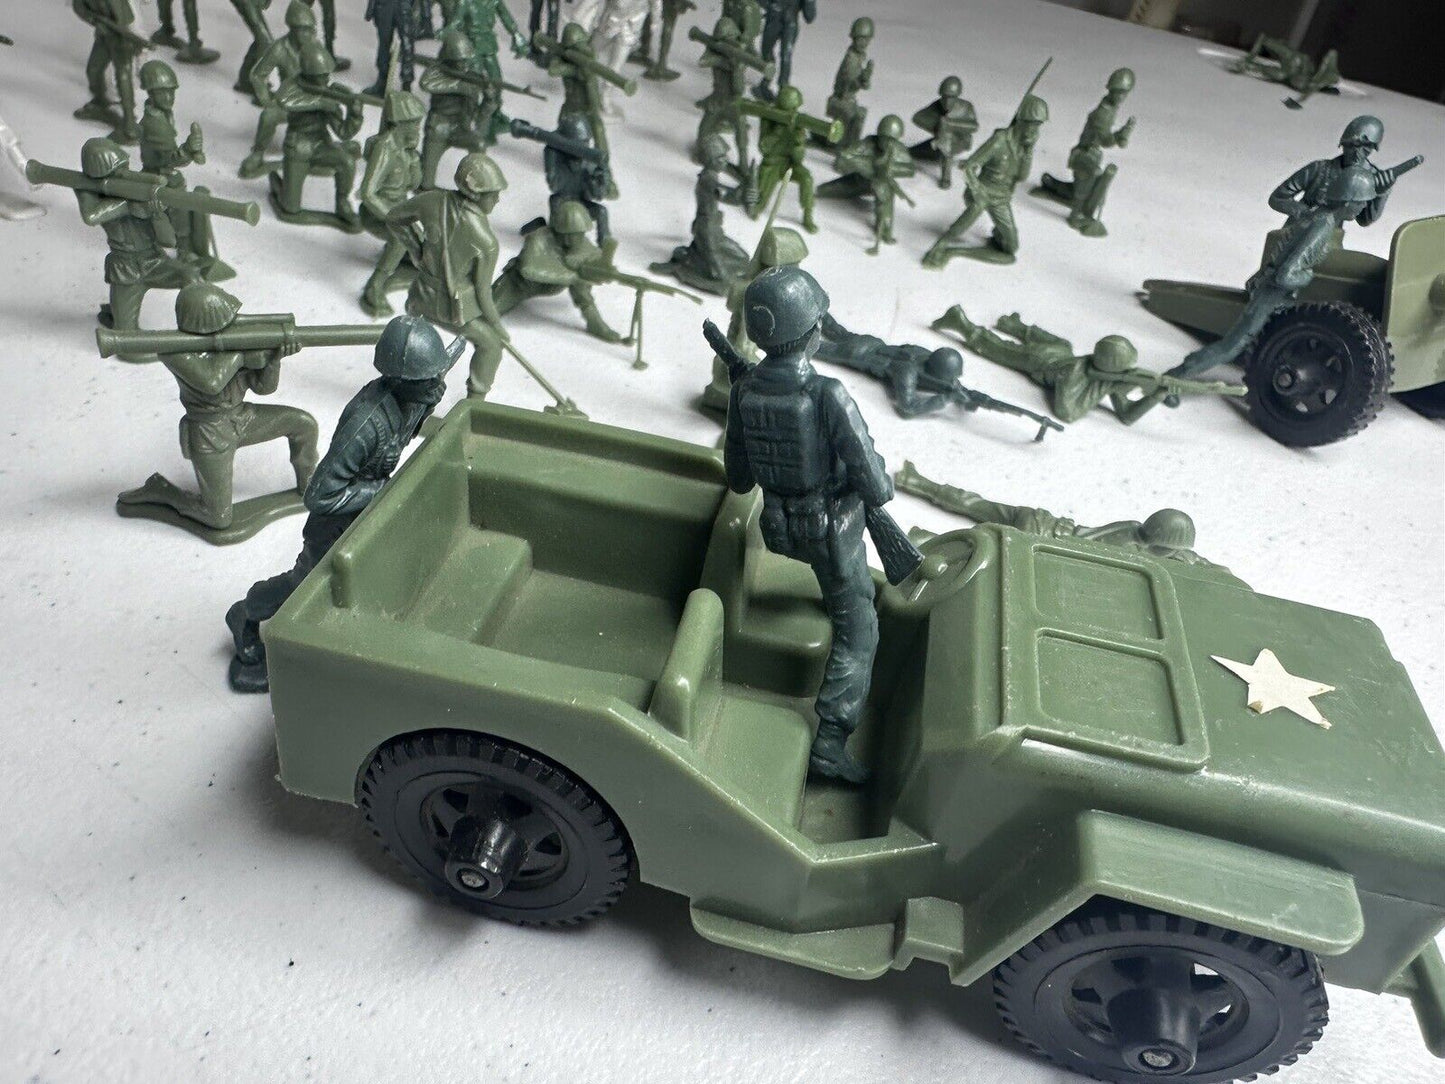 Vintage Tim-Mee & Marx Toy Soldier Lot with Army Jeep and Cannon Playset - Rare Collectible Military Figures - TreasuTiques